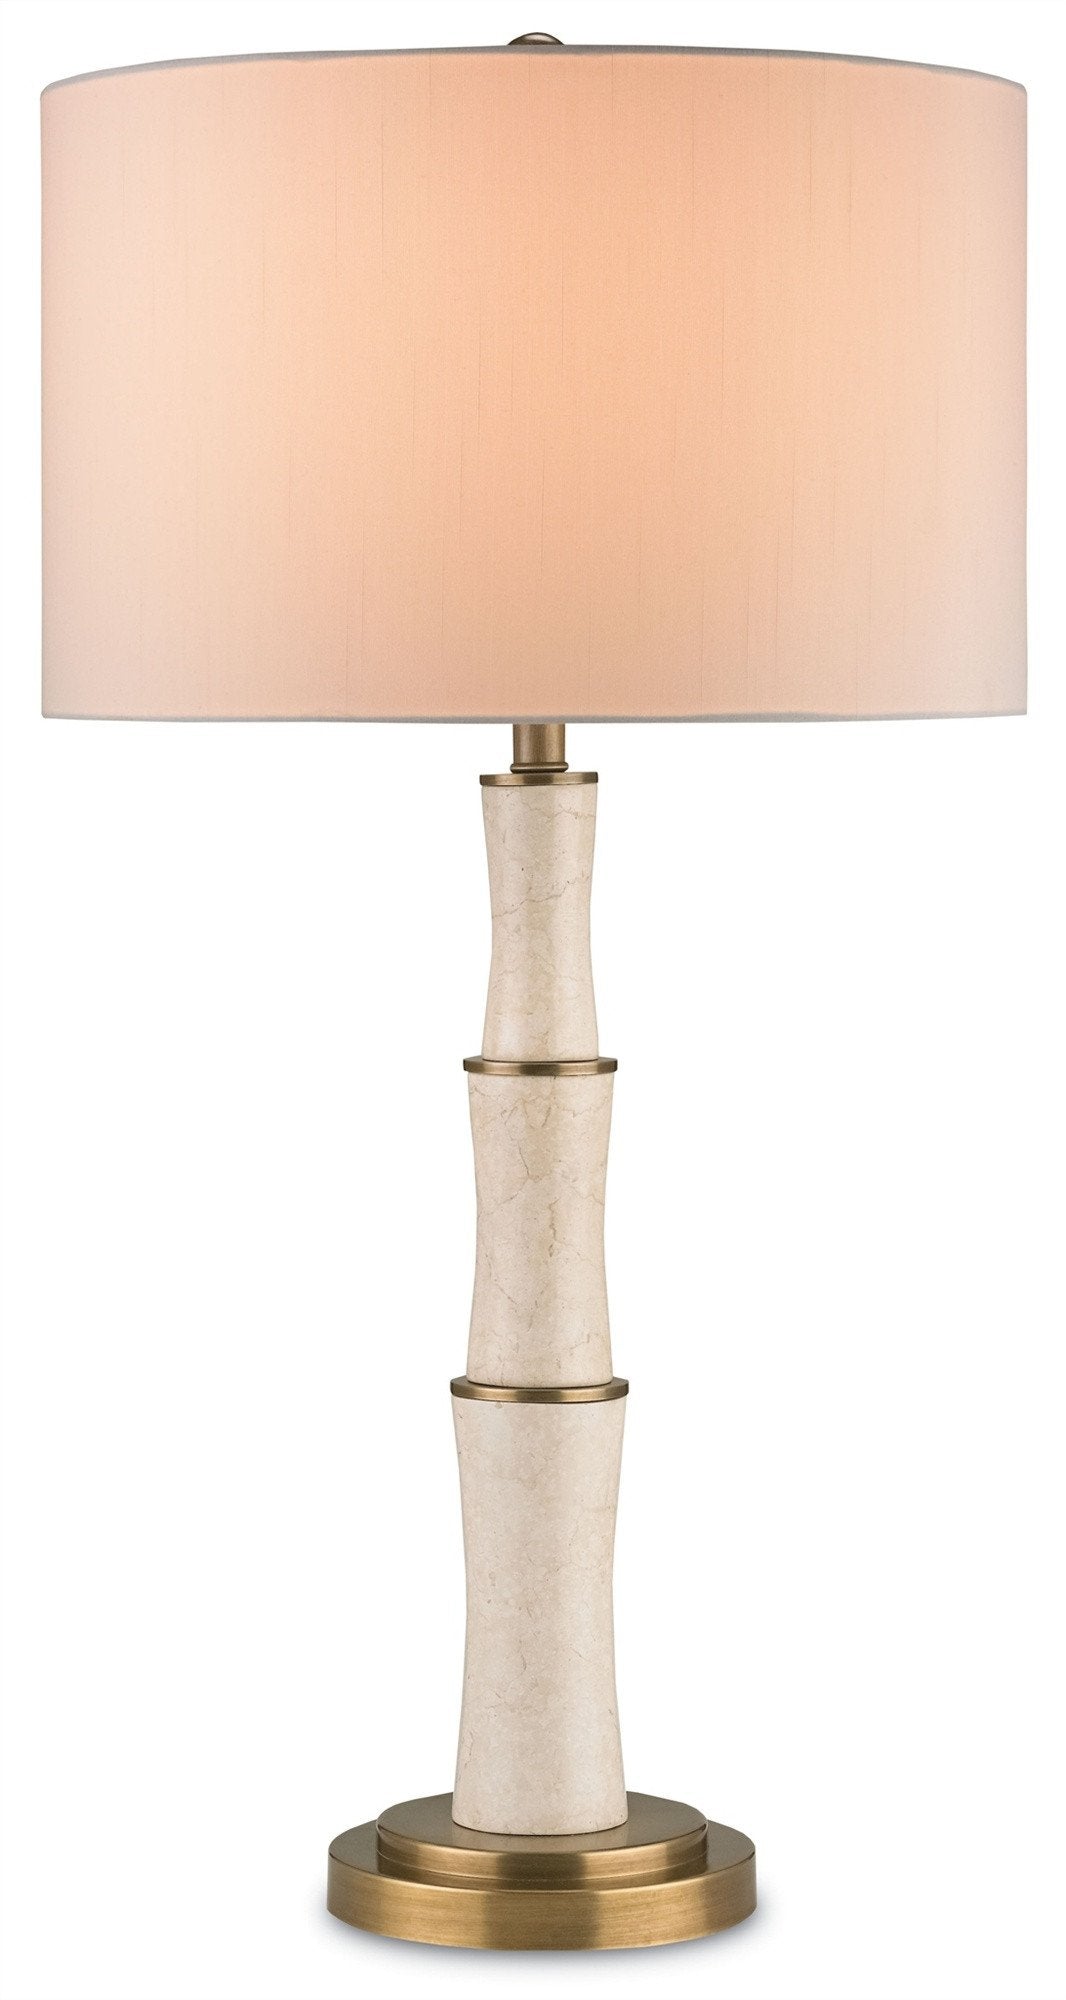 Colette Table Lamp design by Currey and Company